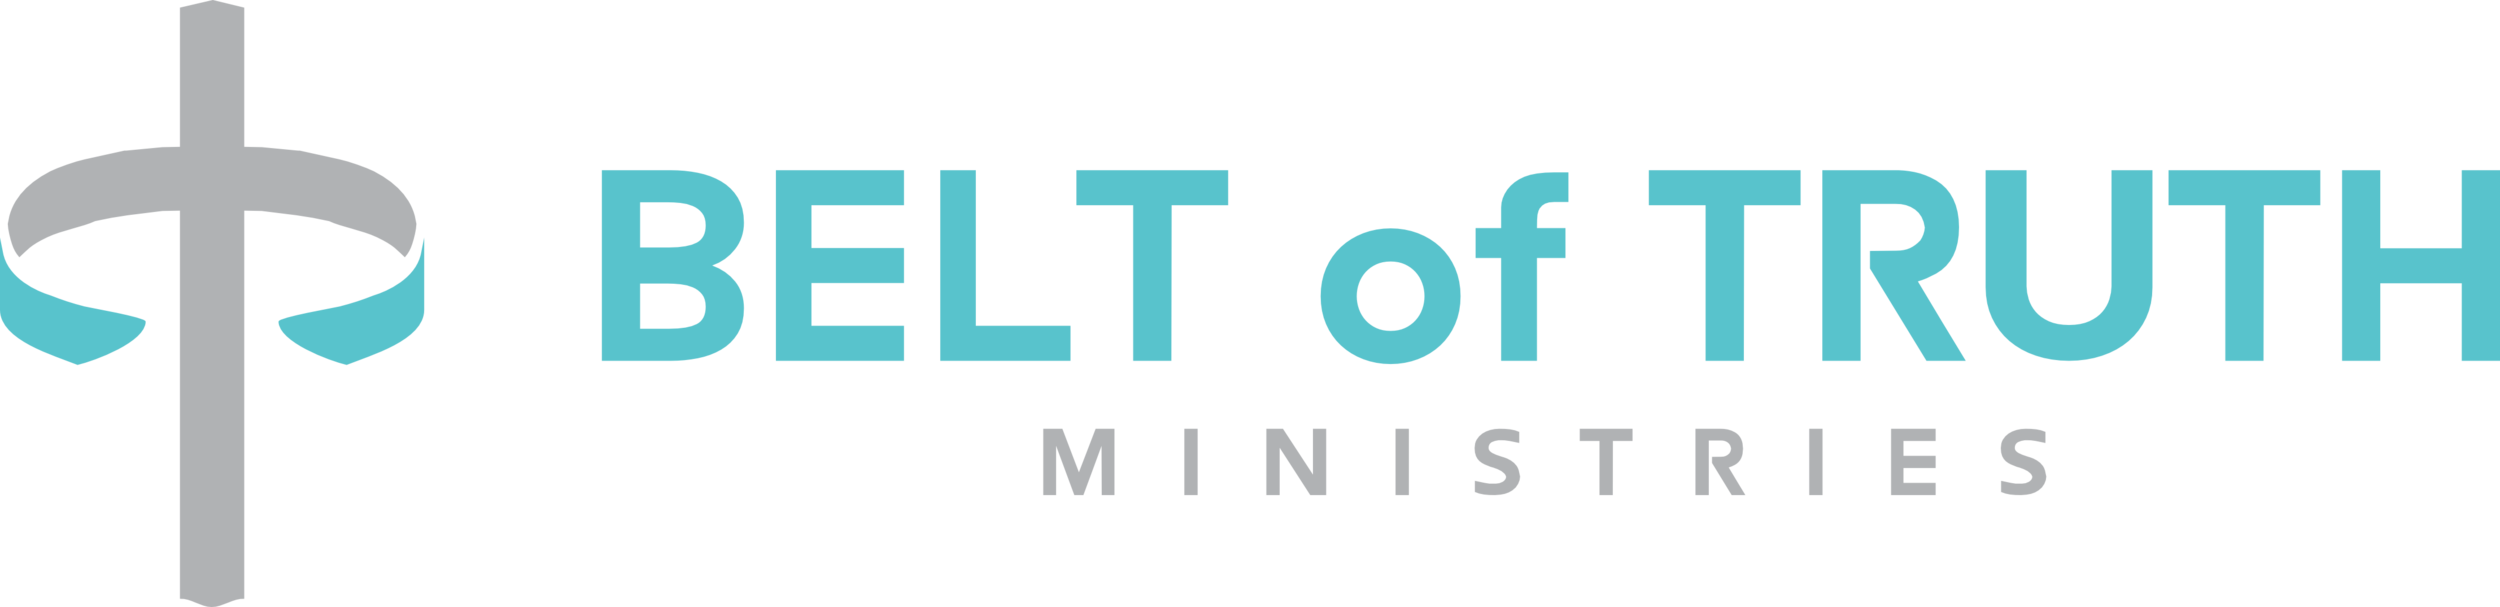 Belt of Truth Ministries - Logo (1).png